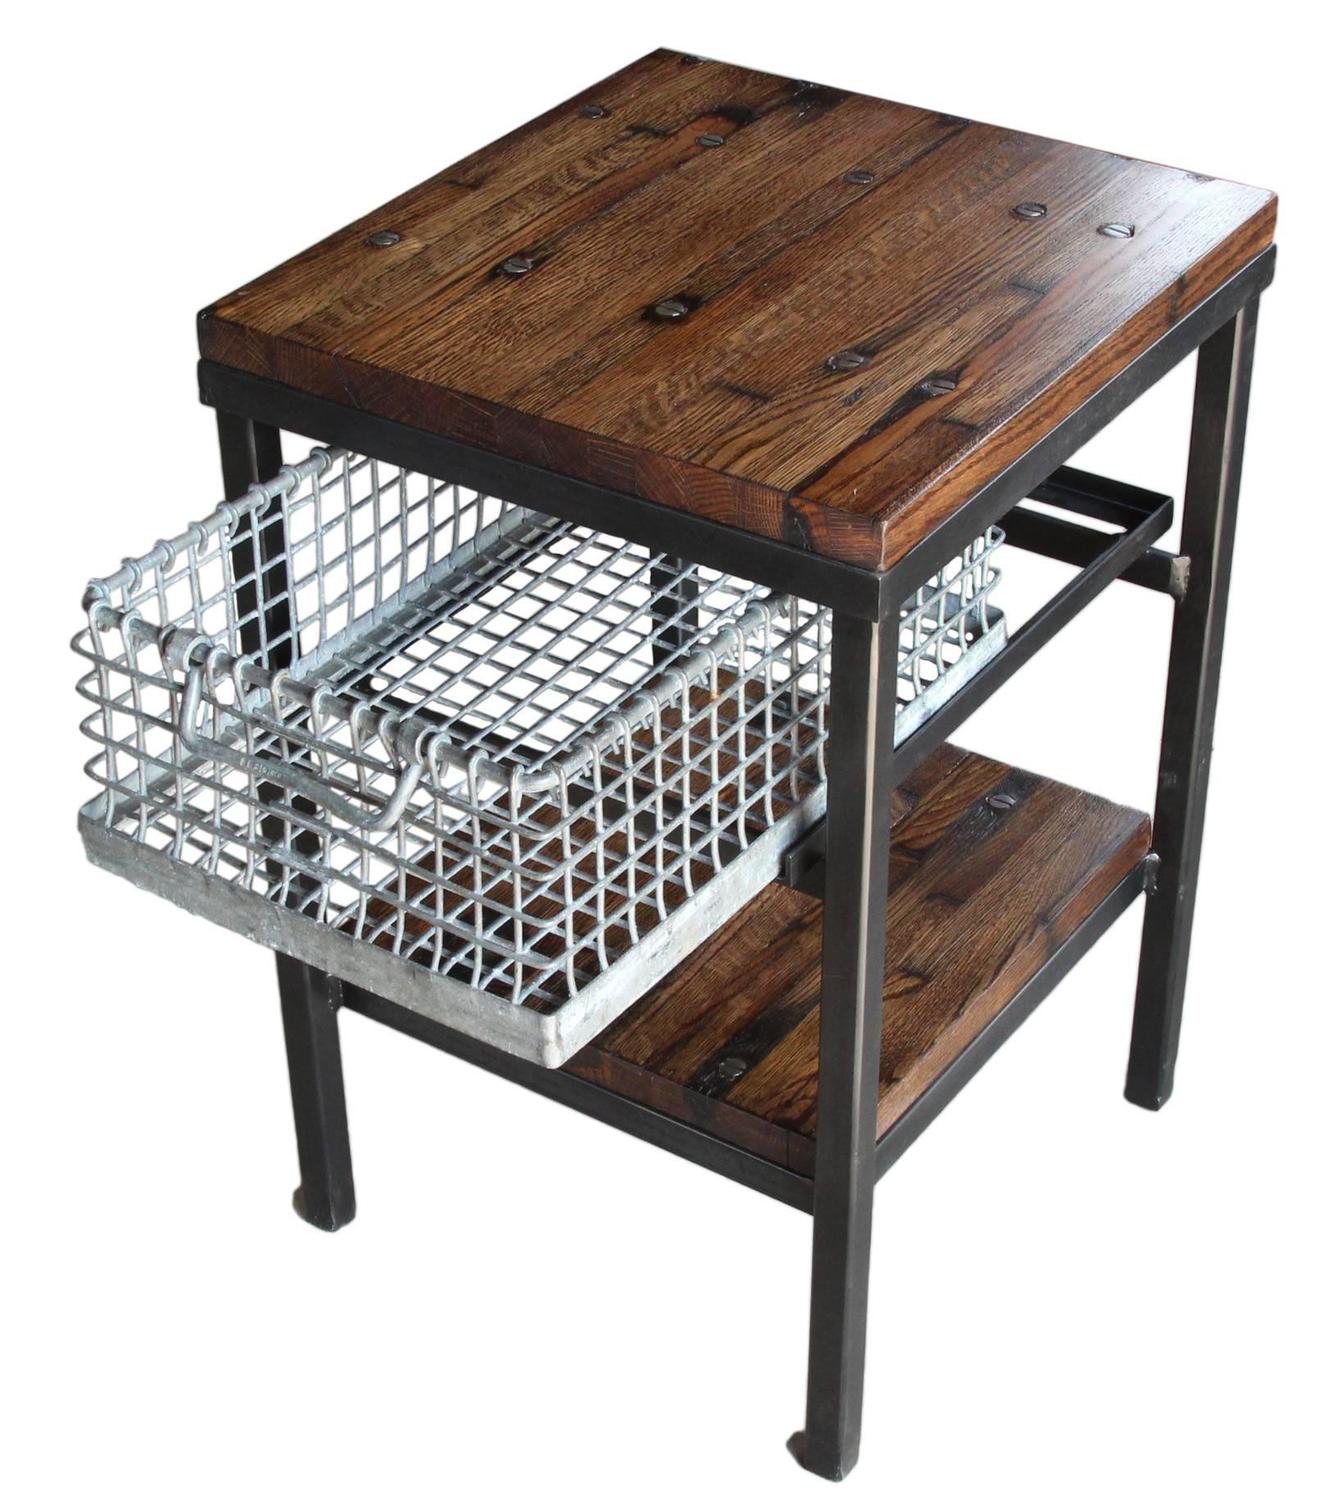 galvanized storage basket nightstand end table with shelf antique zoey night accent baskets walnut elastic tablecloth target project tesco coffee sets black and brown tables doors